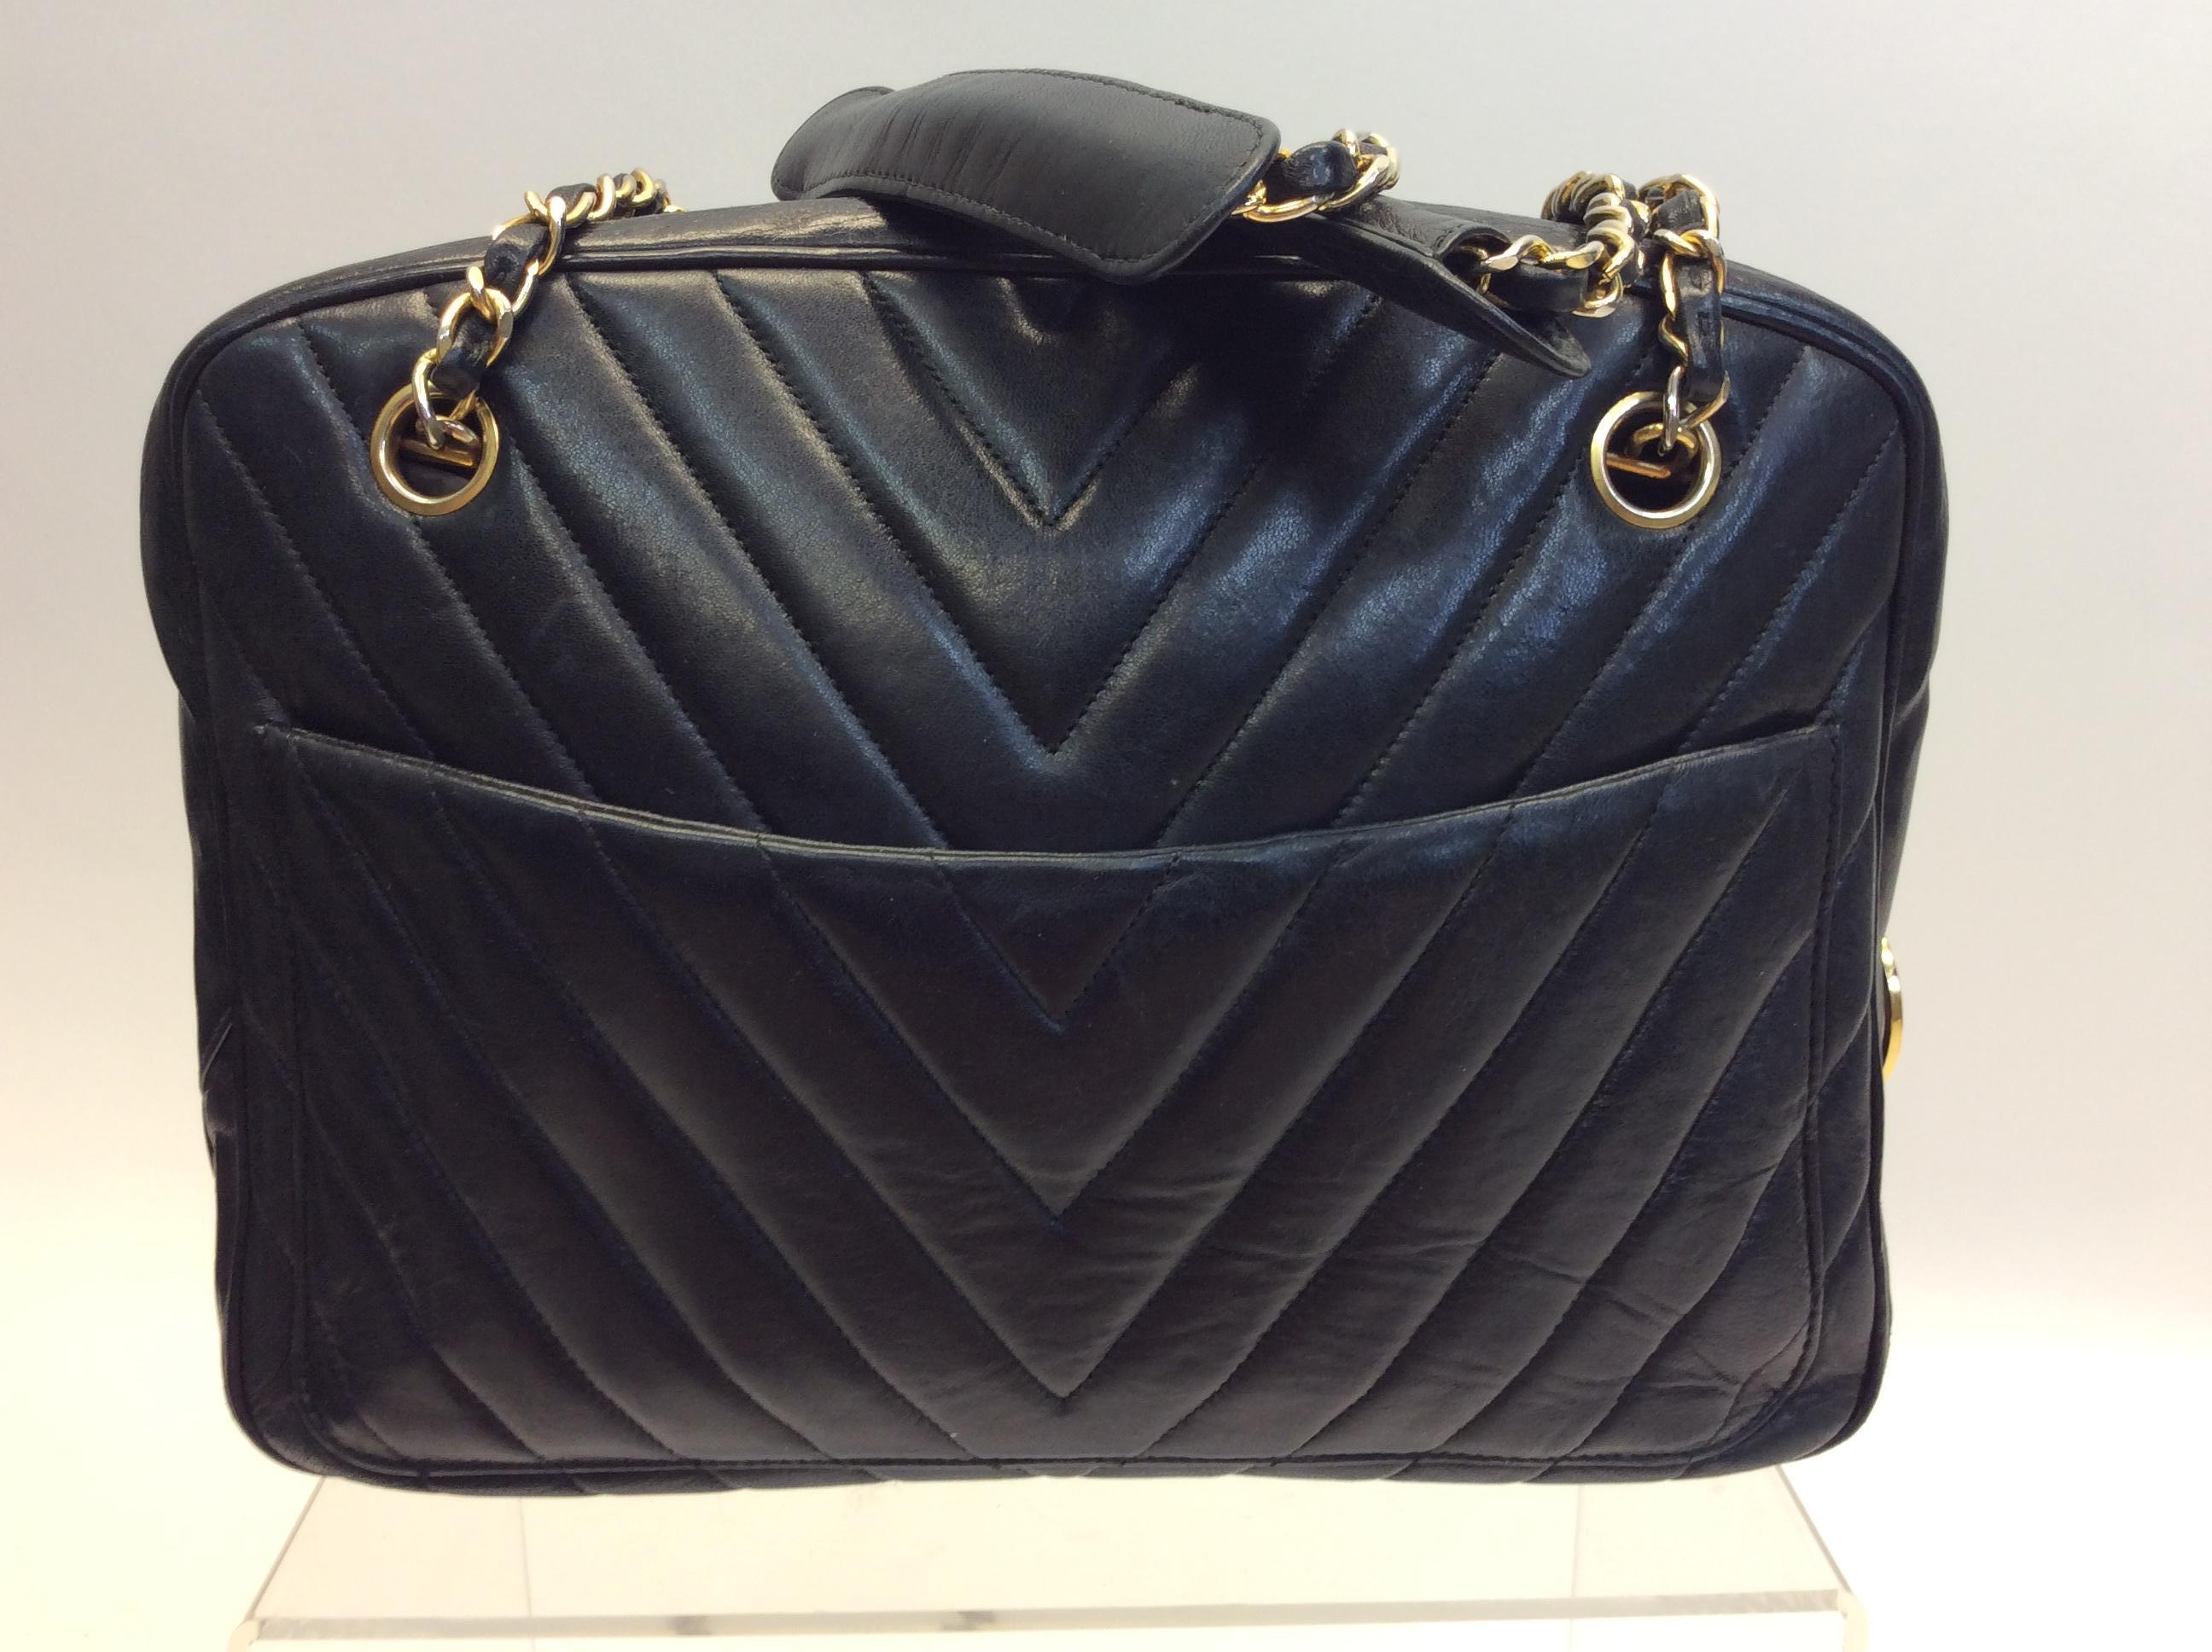 Chanel Black Chevron Quilted Leather Shoulder Bag In Good Condition For Sale In Narberth, PA